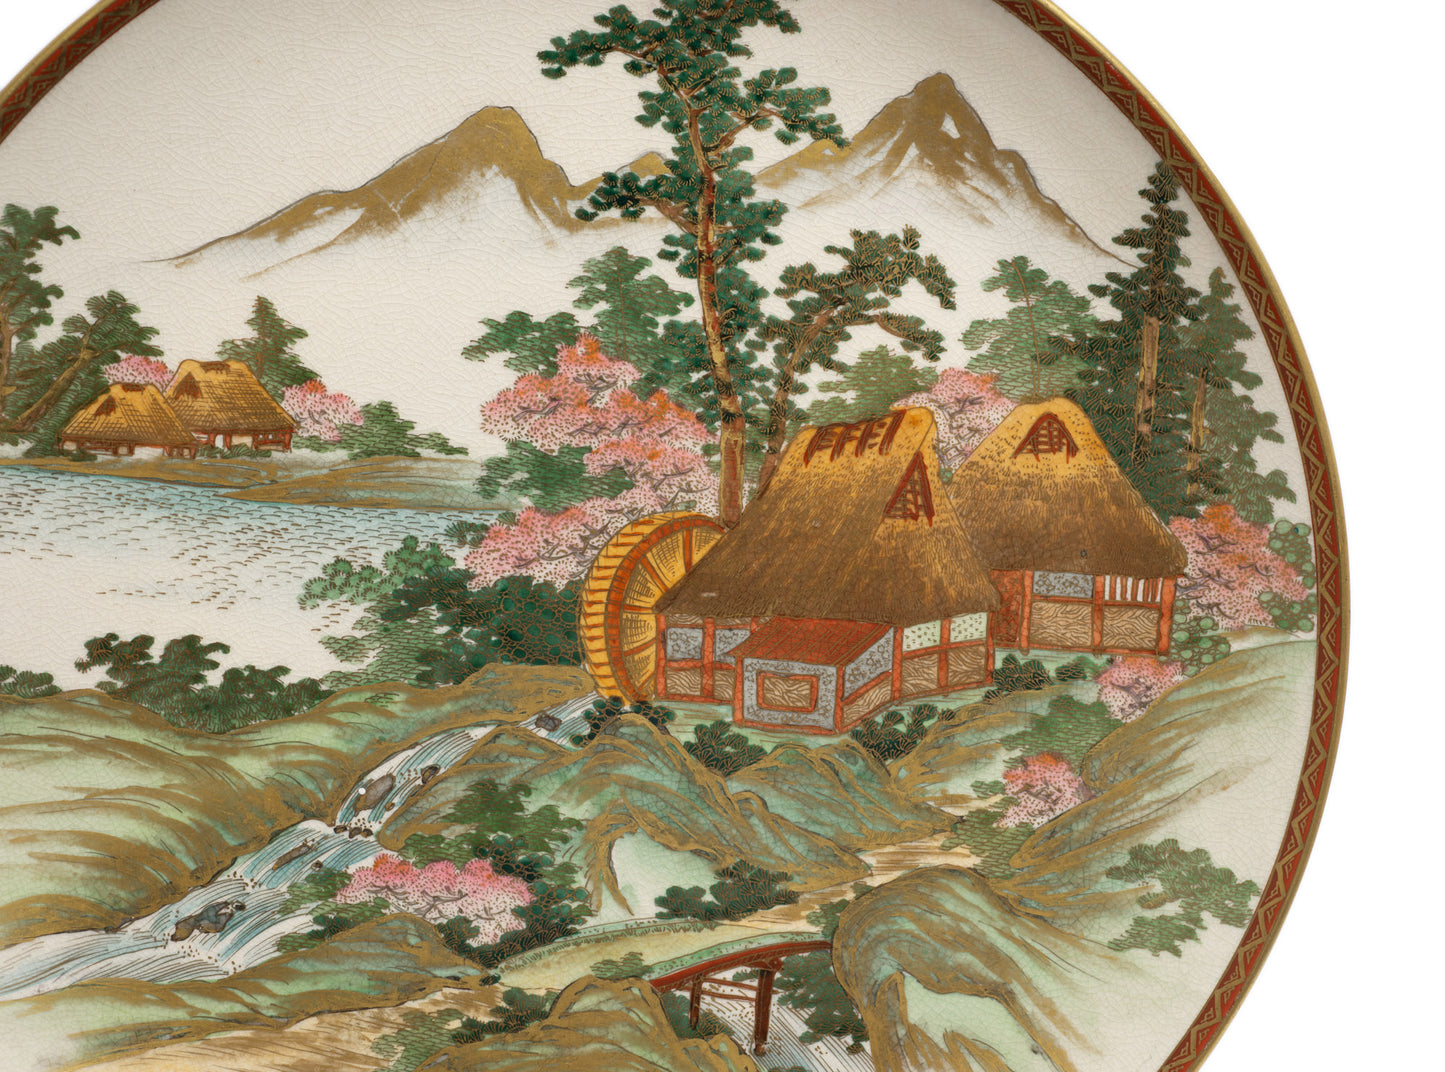 Japanese Satsuma Ware Pottery Plate with Watermill & Mountains by Yuzan - Meiji (Code 2646)